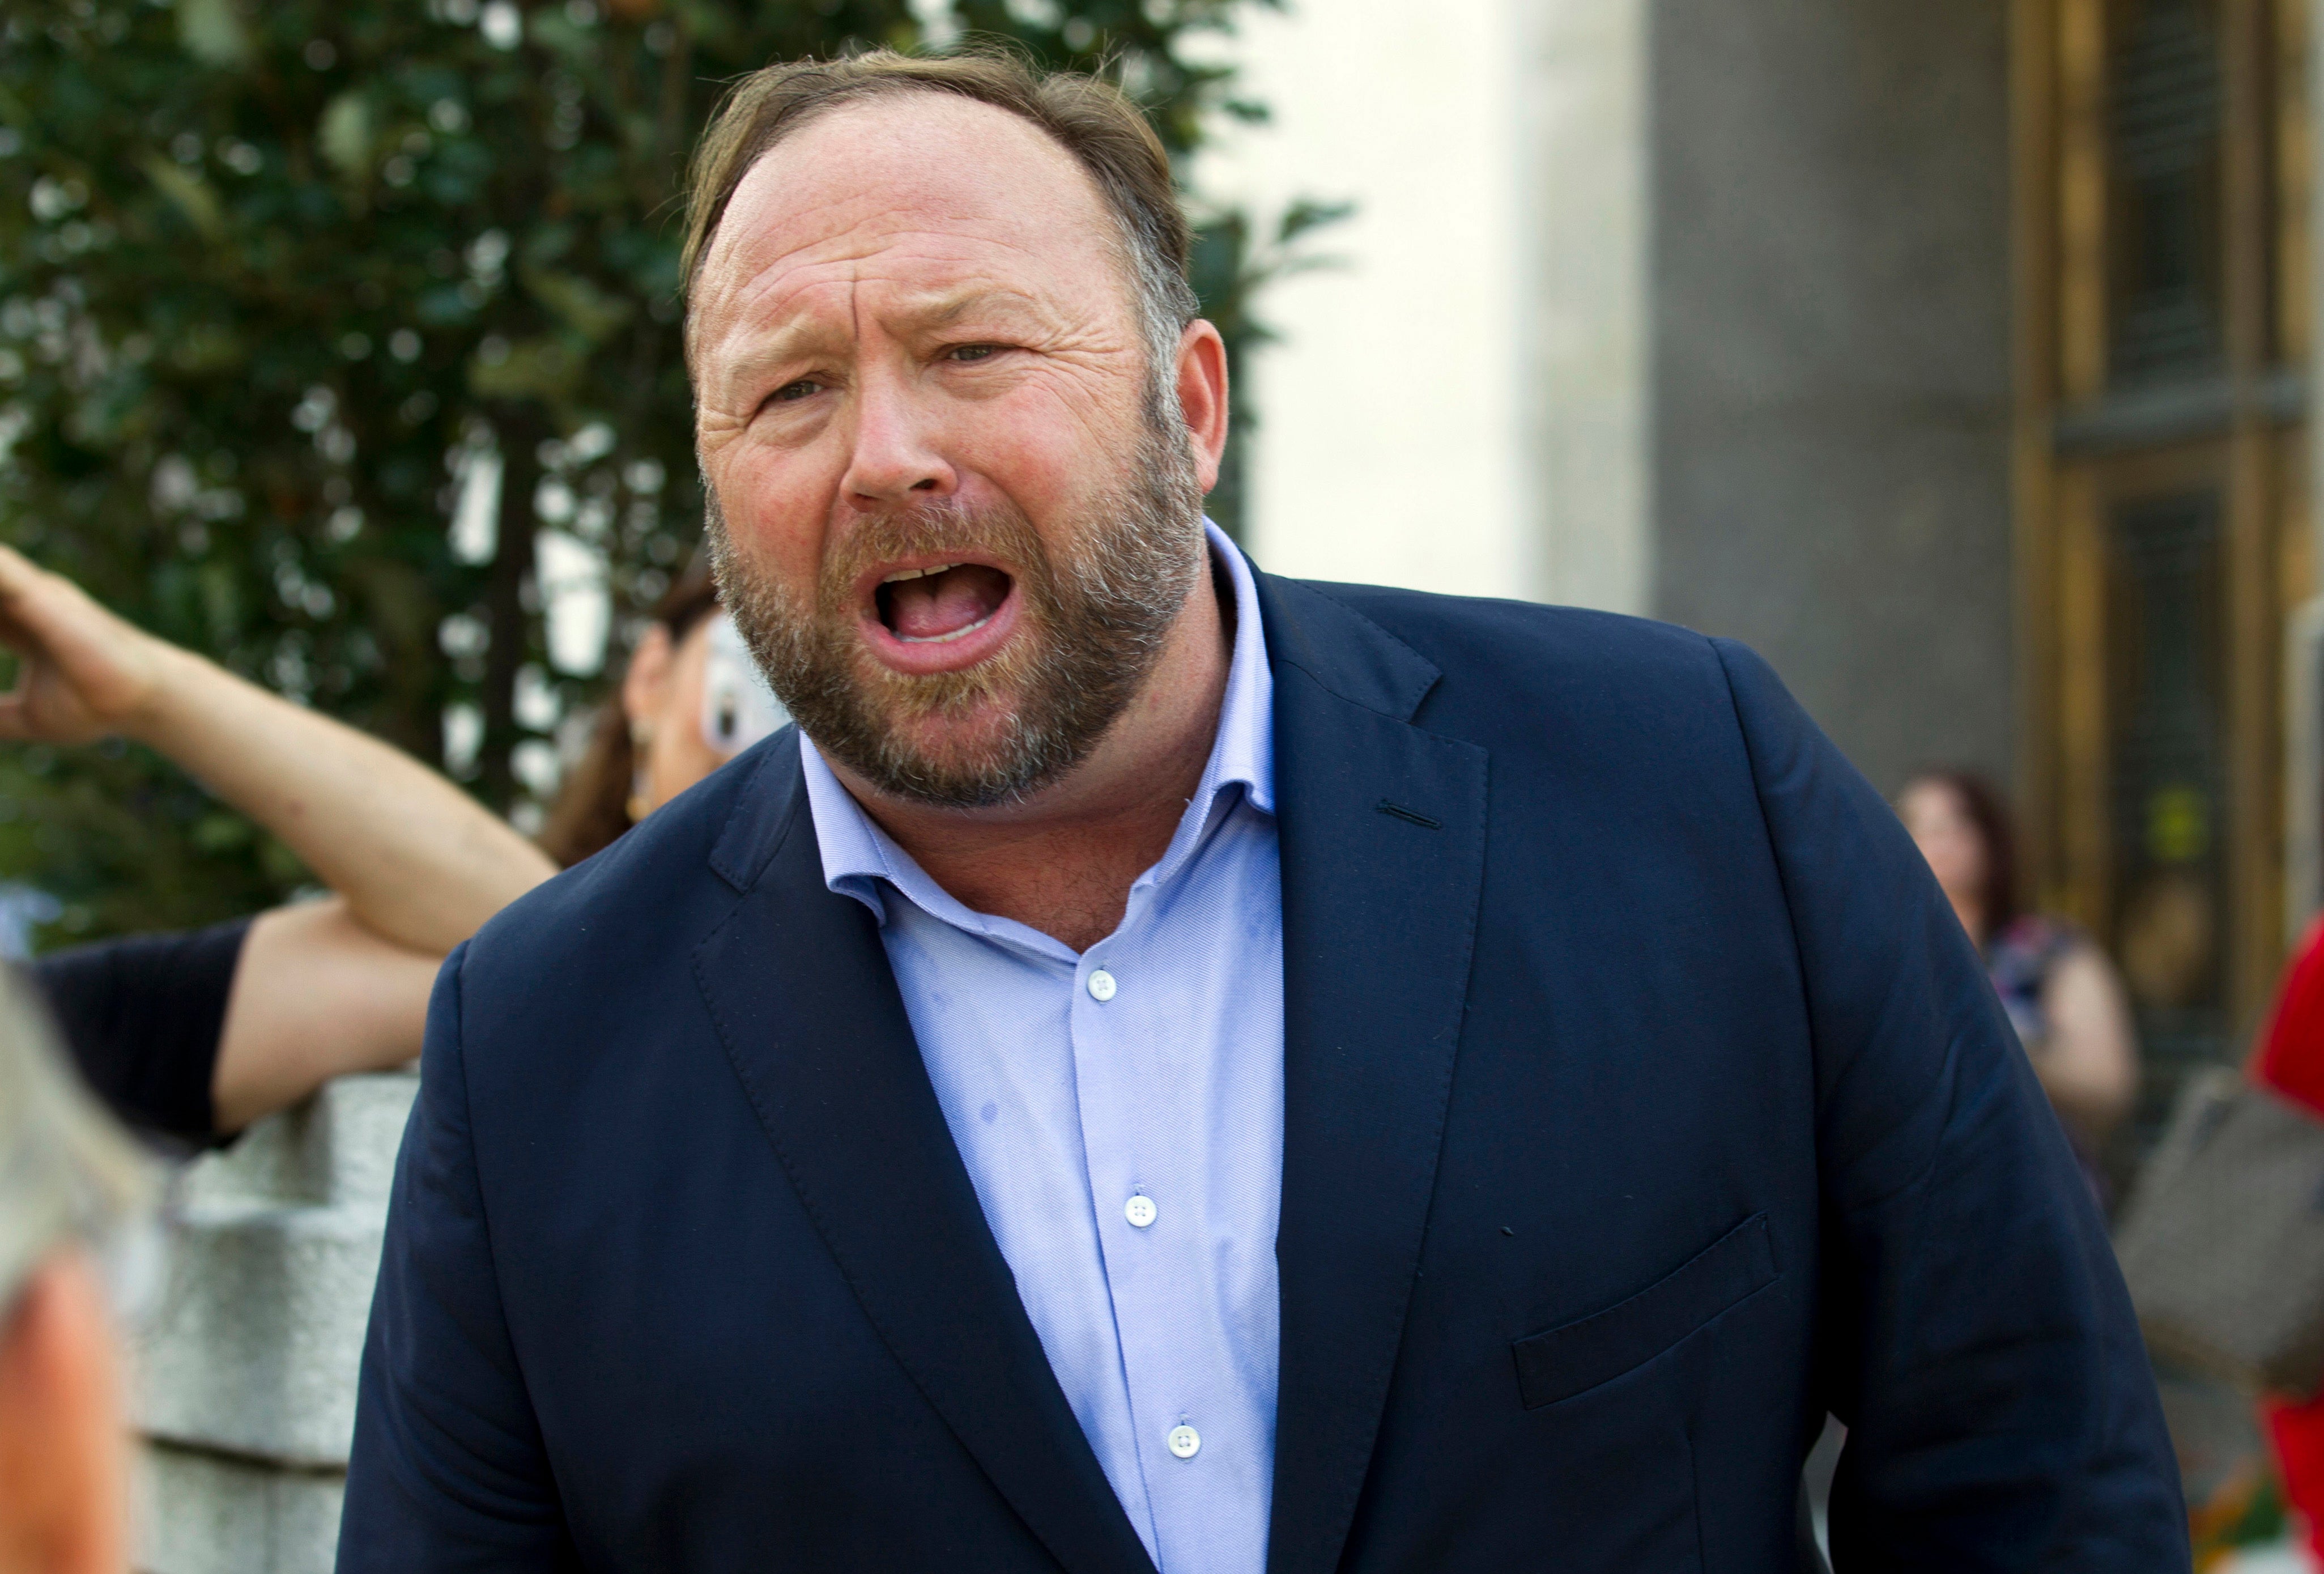 Alex Jones is being sued by the families of the Sandy Hook mass shooting